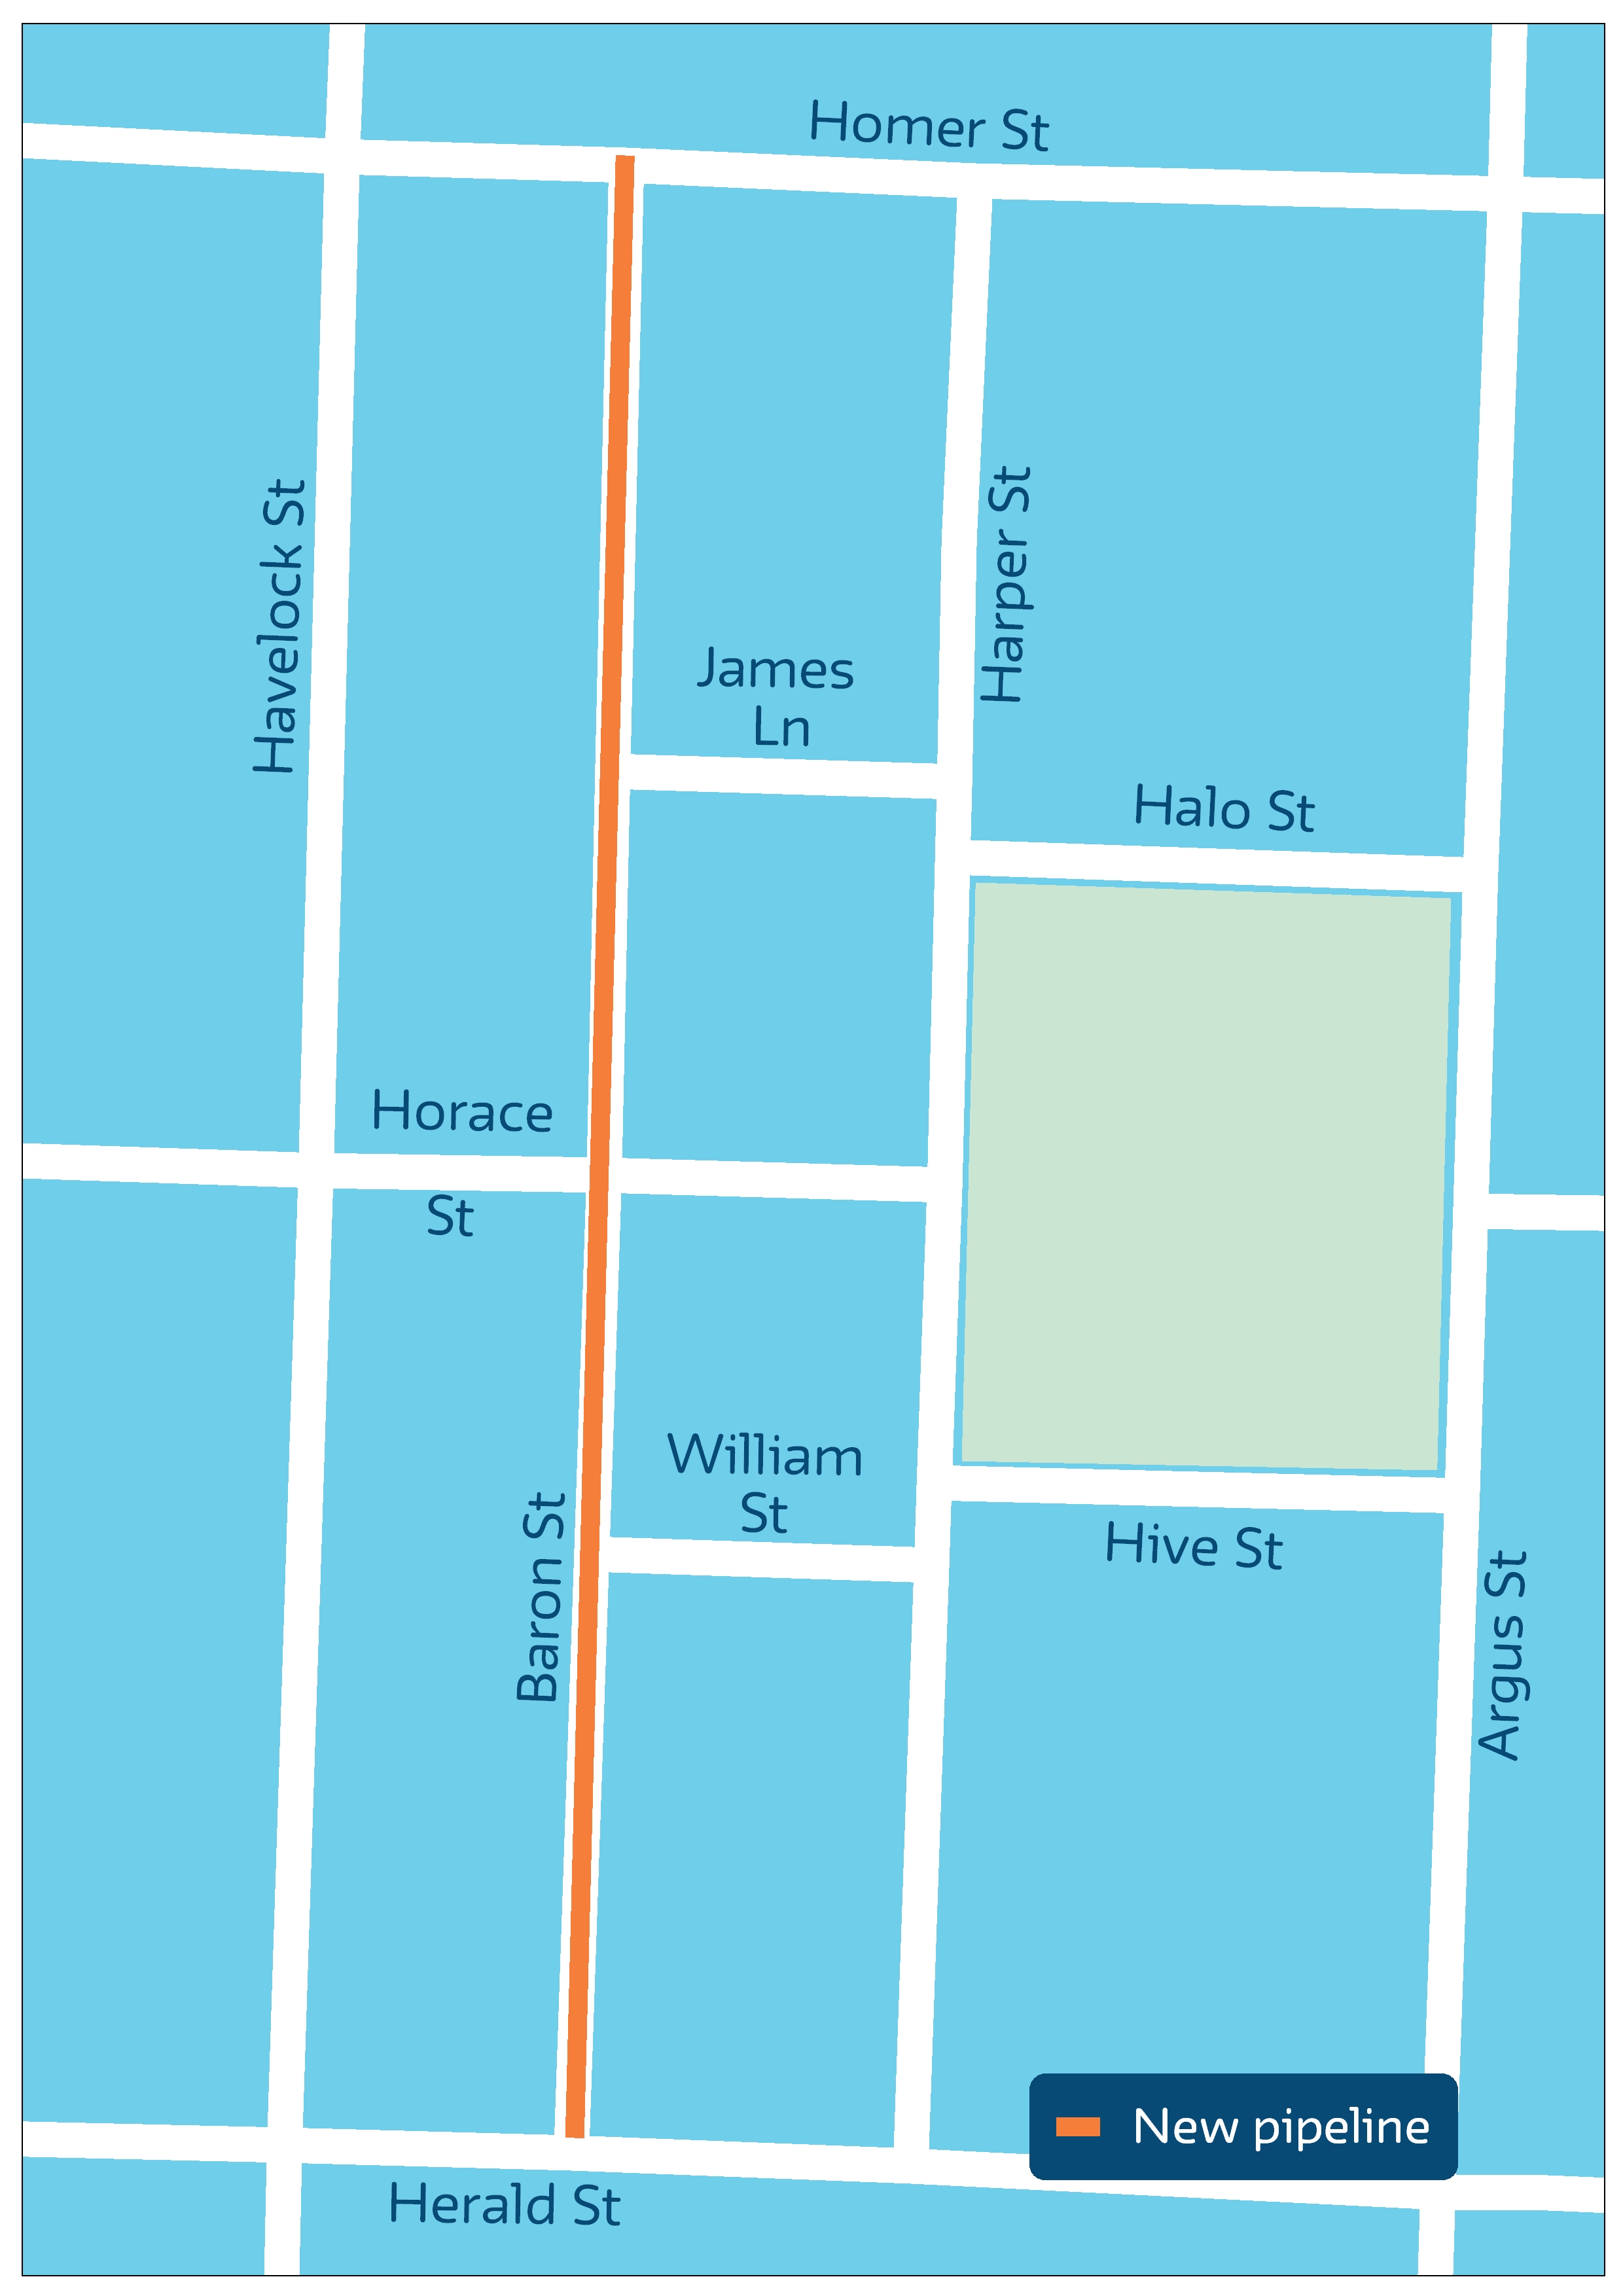 Image shows planned pipe replacement running along Barron Street, Narrogin, between Herald St and Homer St